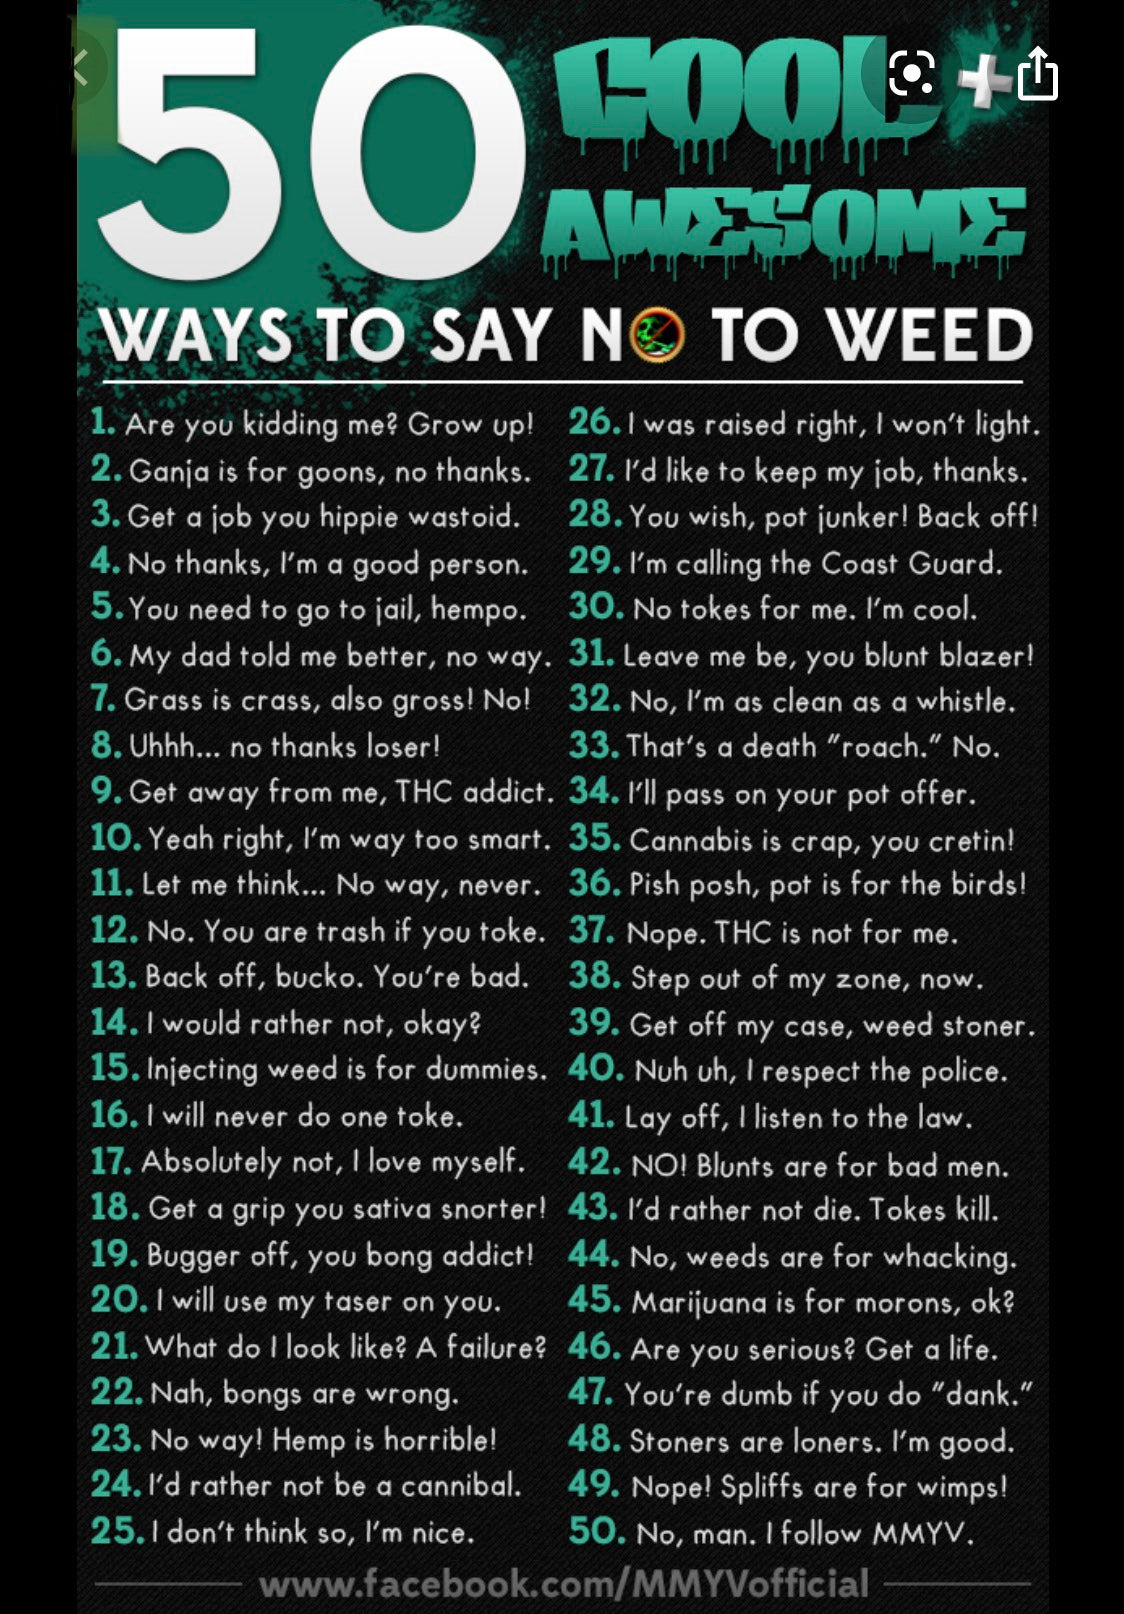 50 Ways to say no to weed.